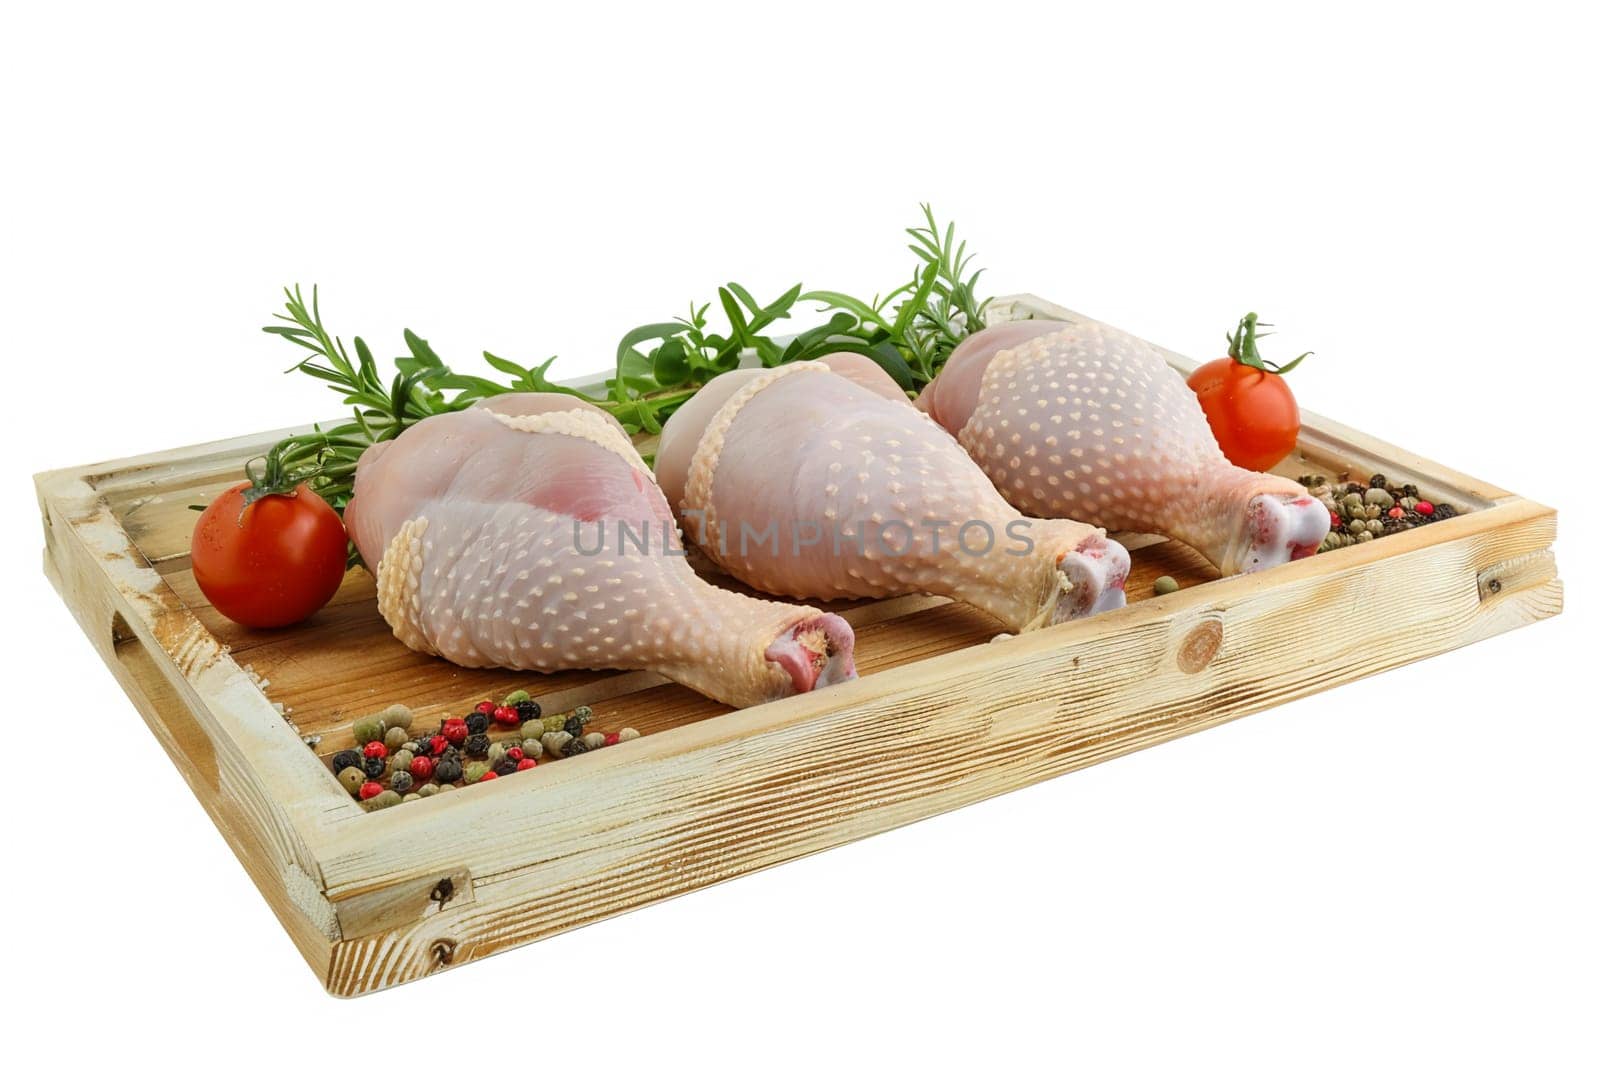 Raw chicken legs with fresh rosemary, tomato, black peppercorns on wooden tray, perfect preparation for culinary dishes, high-quality poultry farming.